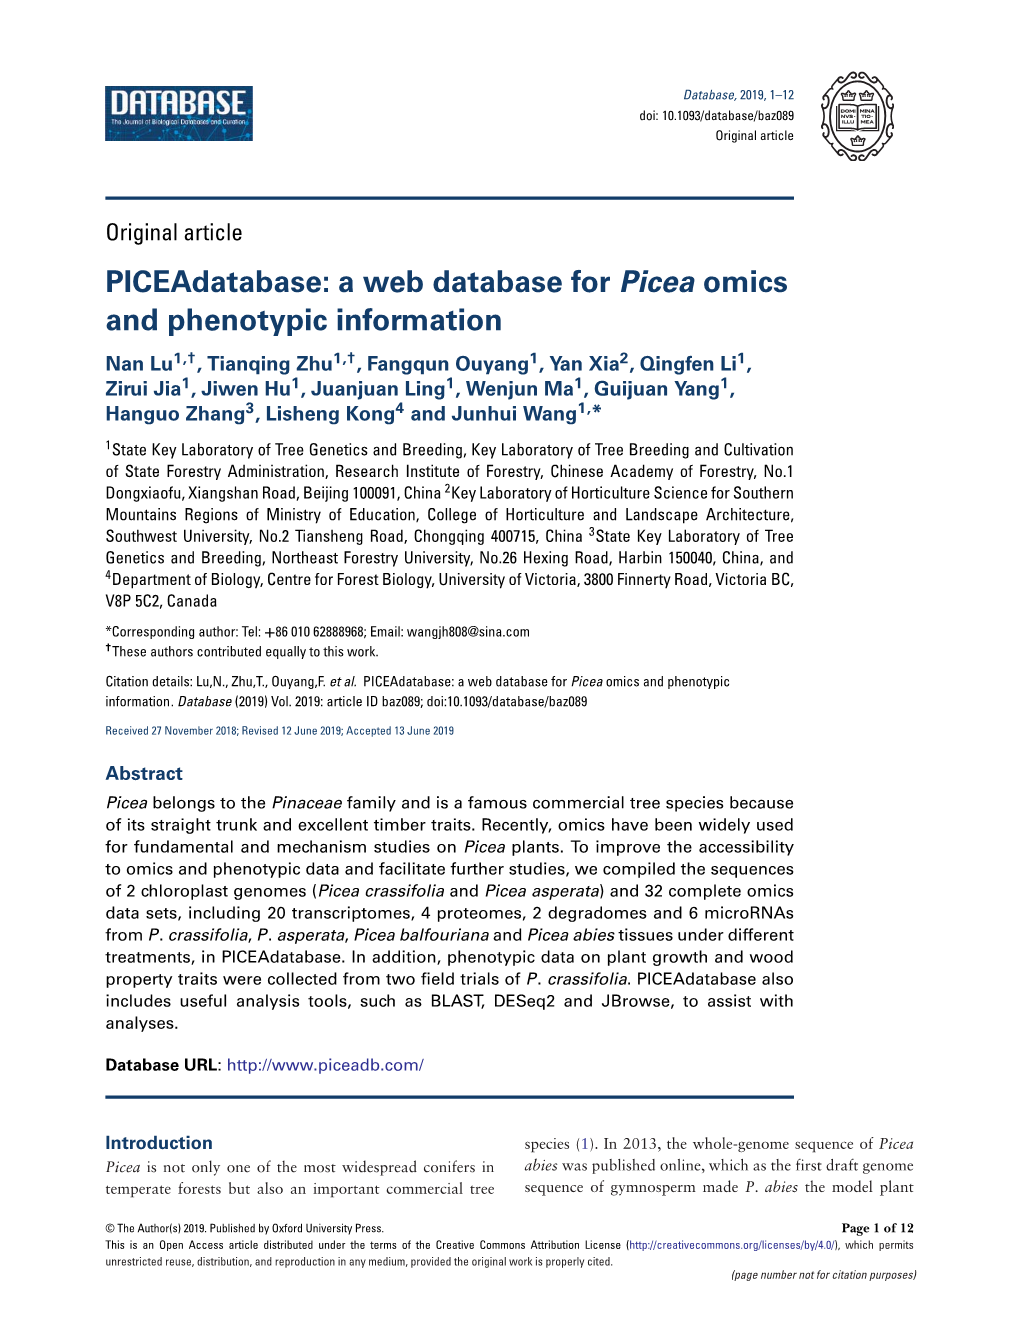 A Web Database for Picea Omics and Phenotypic Information